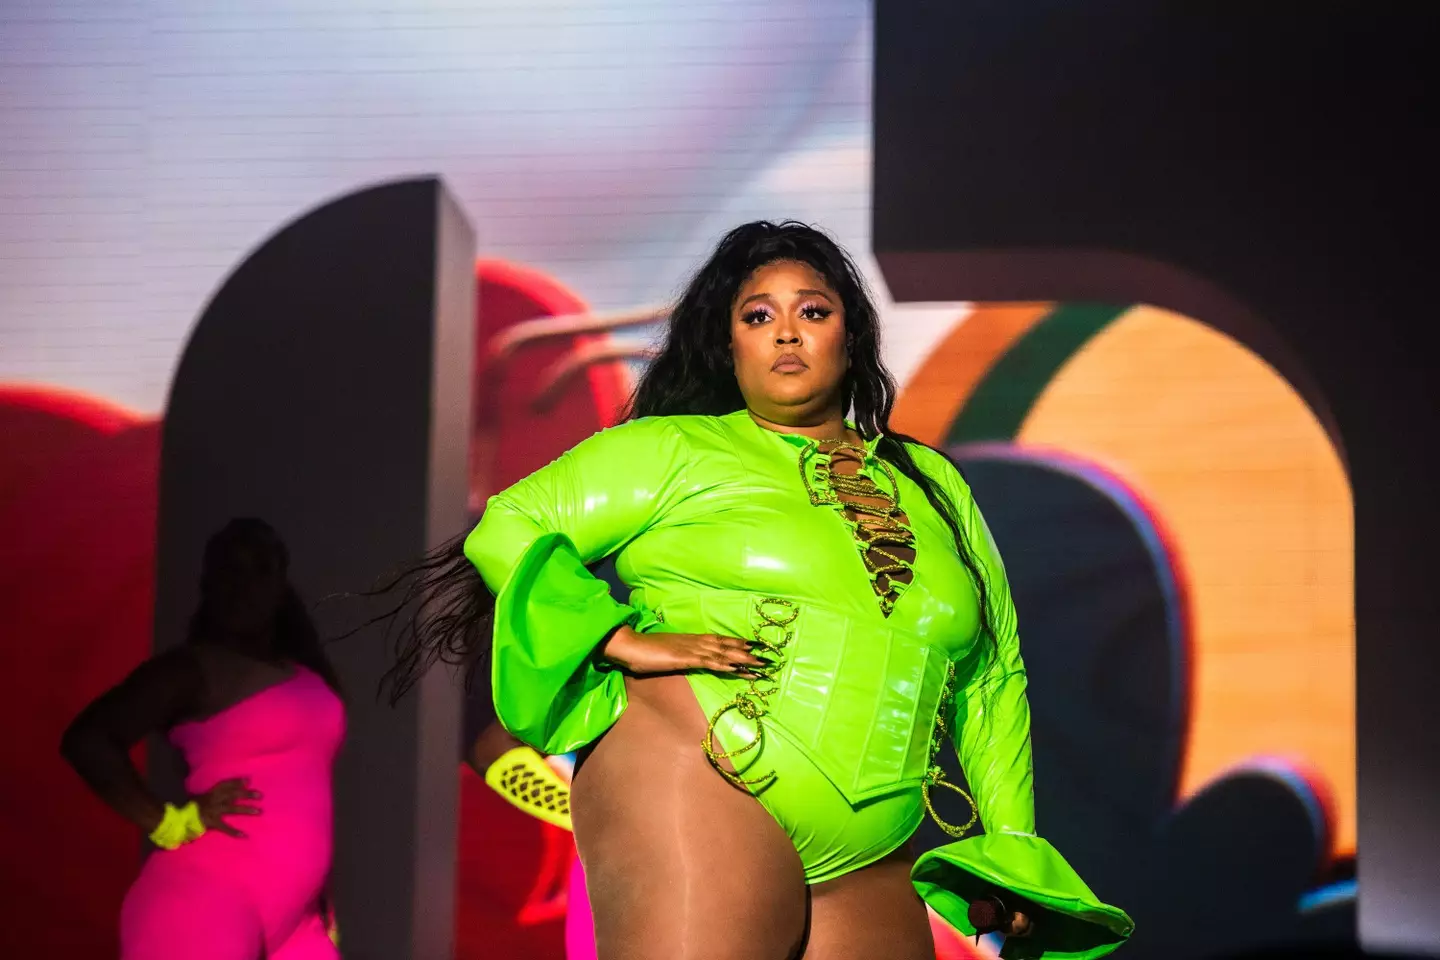 Lizzo wants fashion brands to do more to make glamourous clothes for larger women.